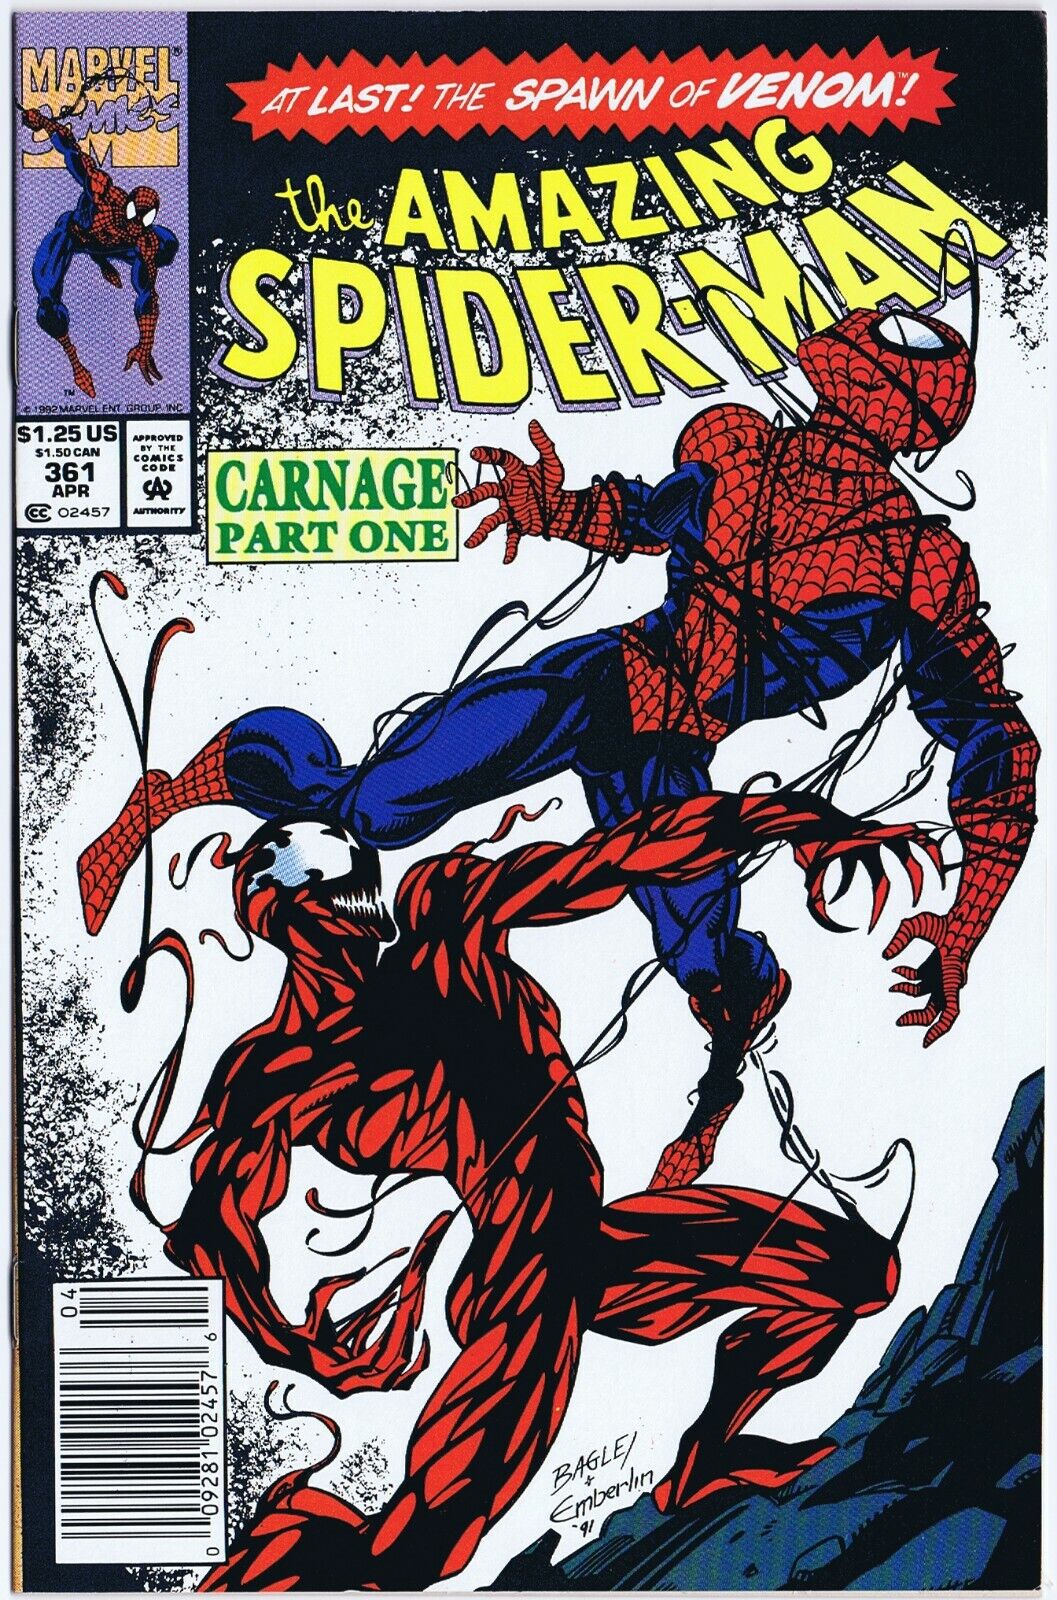 THE AMAZING SPIDER-MAN 361 Marvel Comics 1992 1st CARNAGE Newsstand Edition